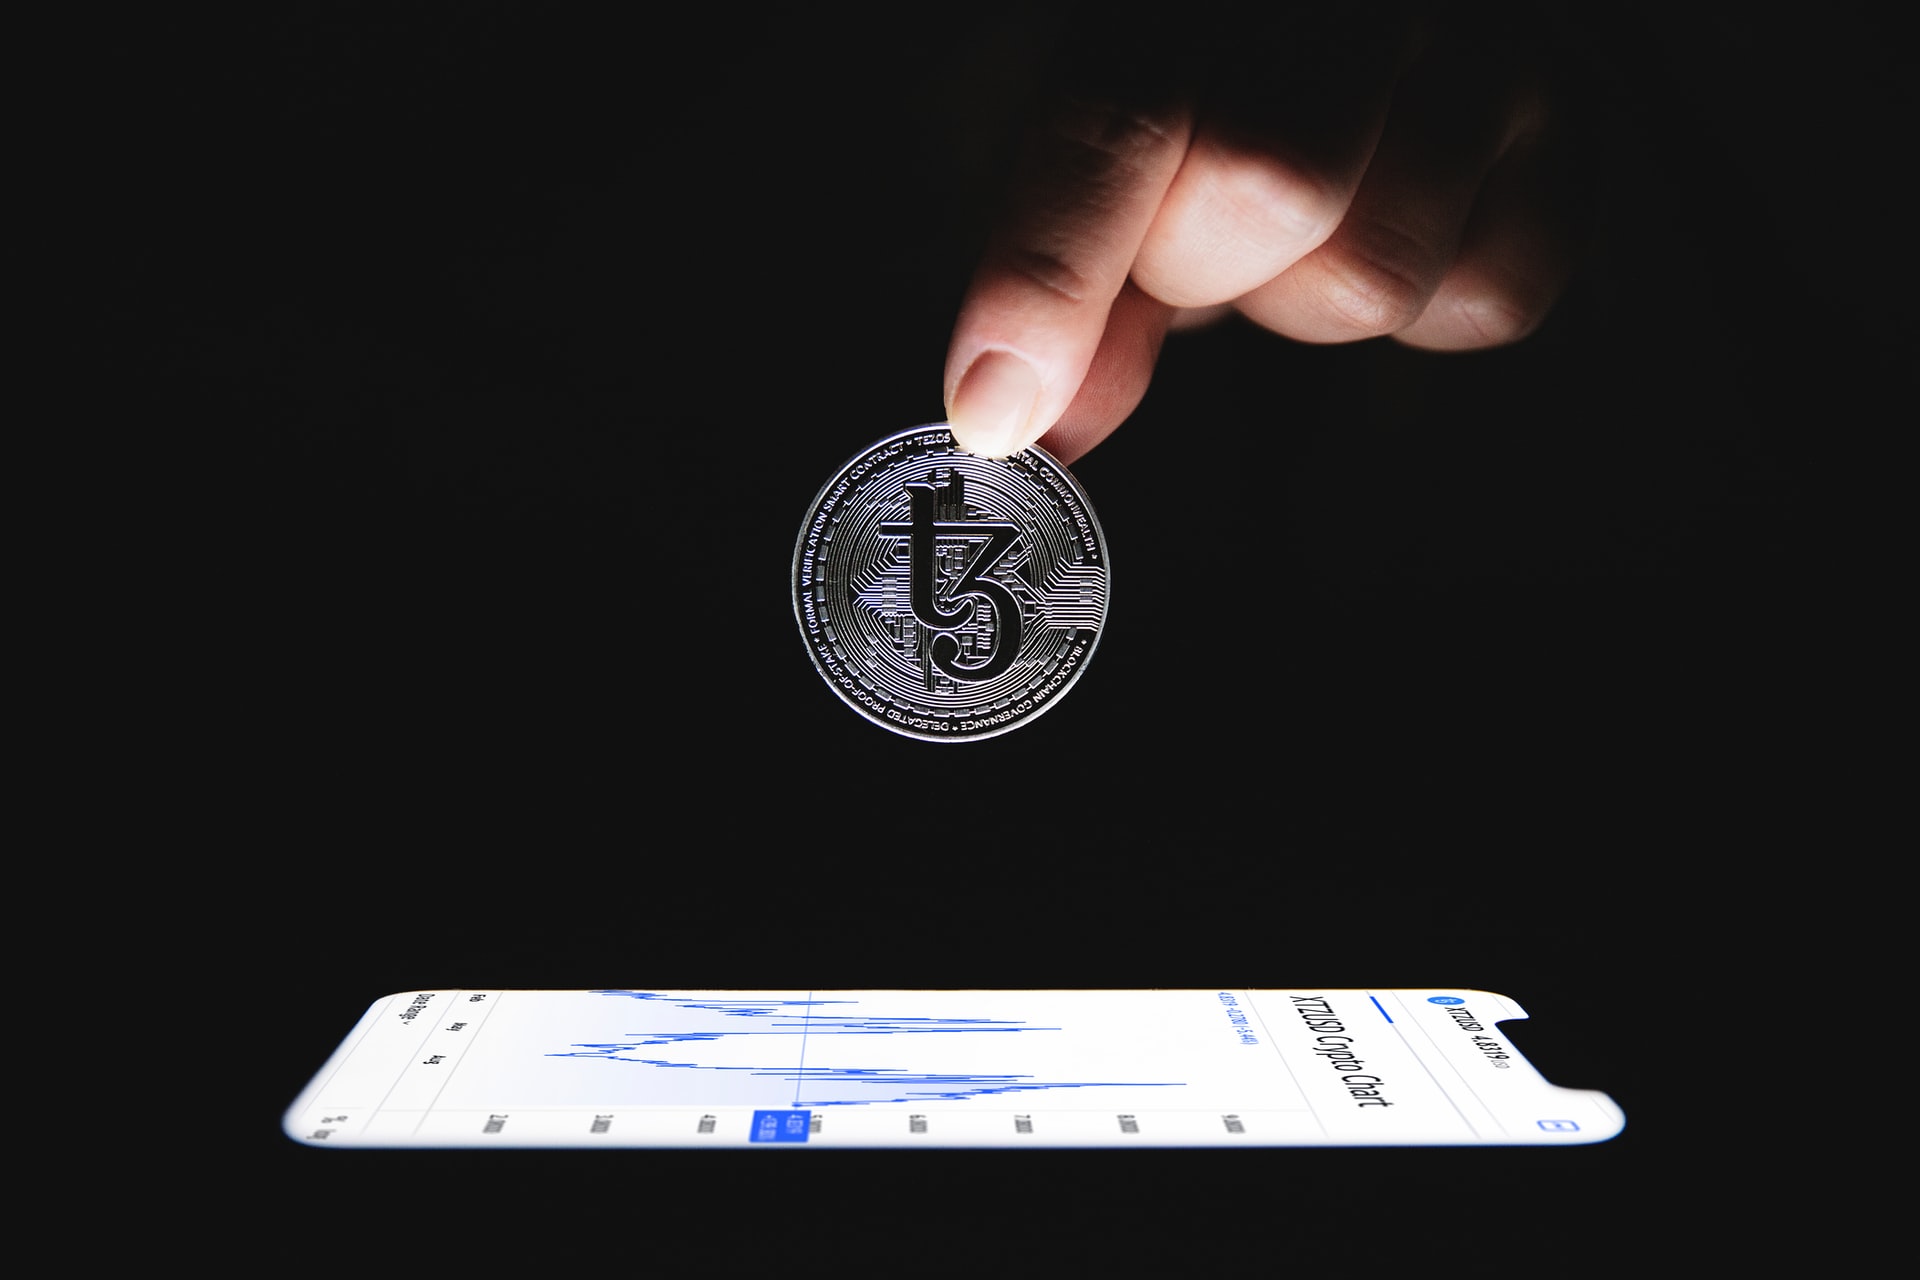 hand holding a coin with a crypto identification on top of a cellphone with graphics on the screen